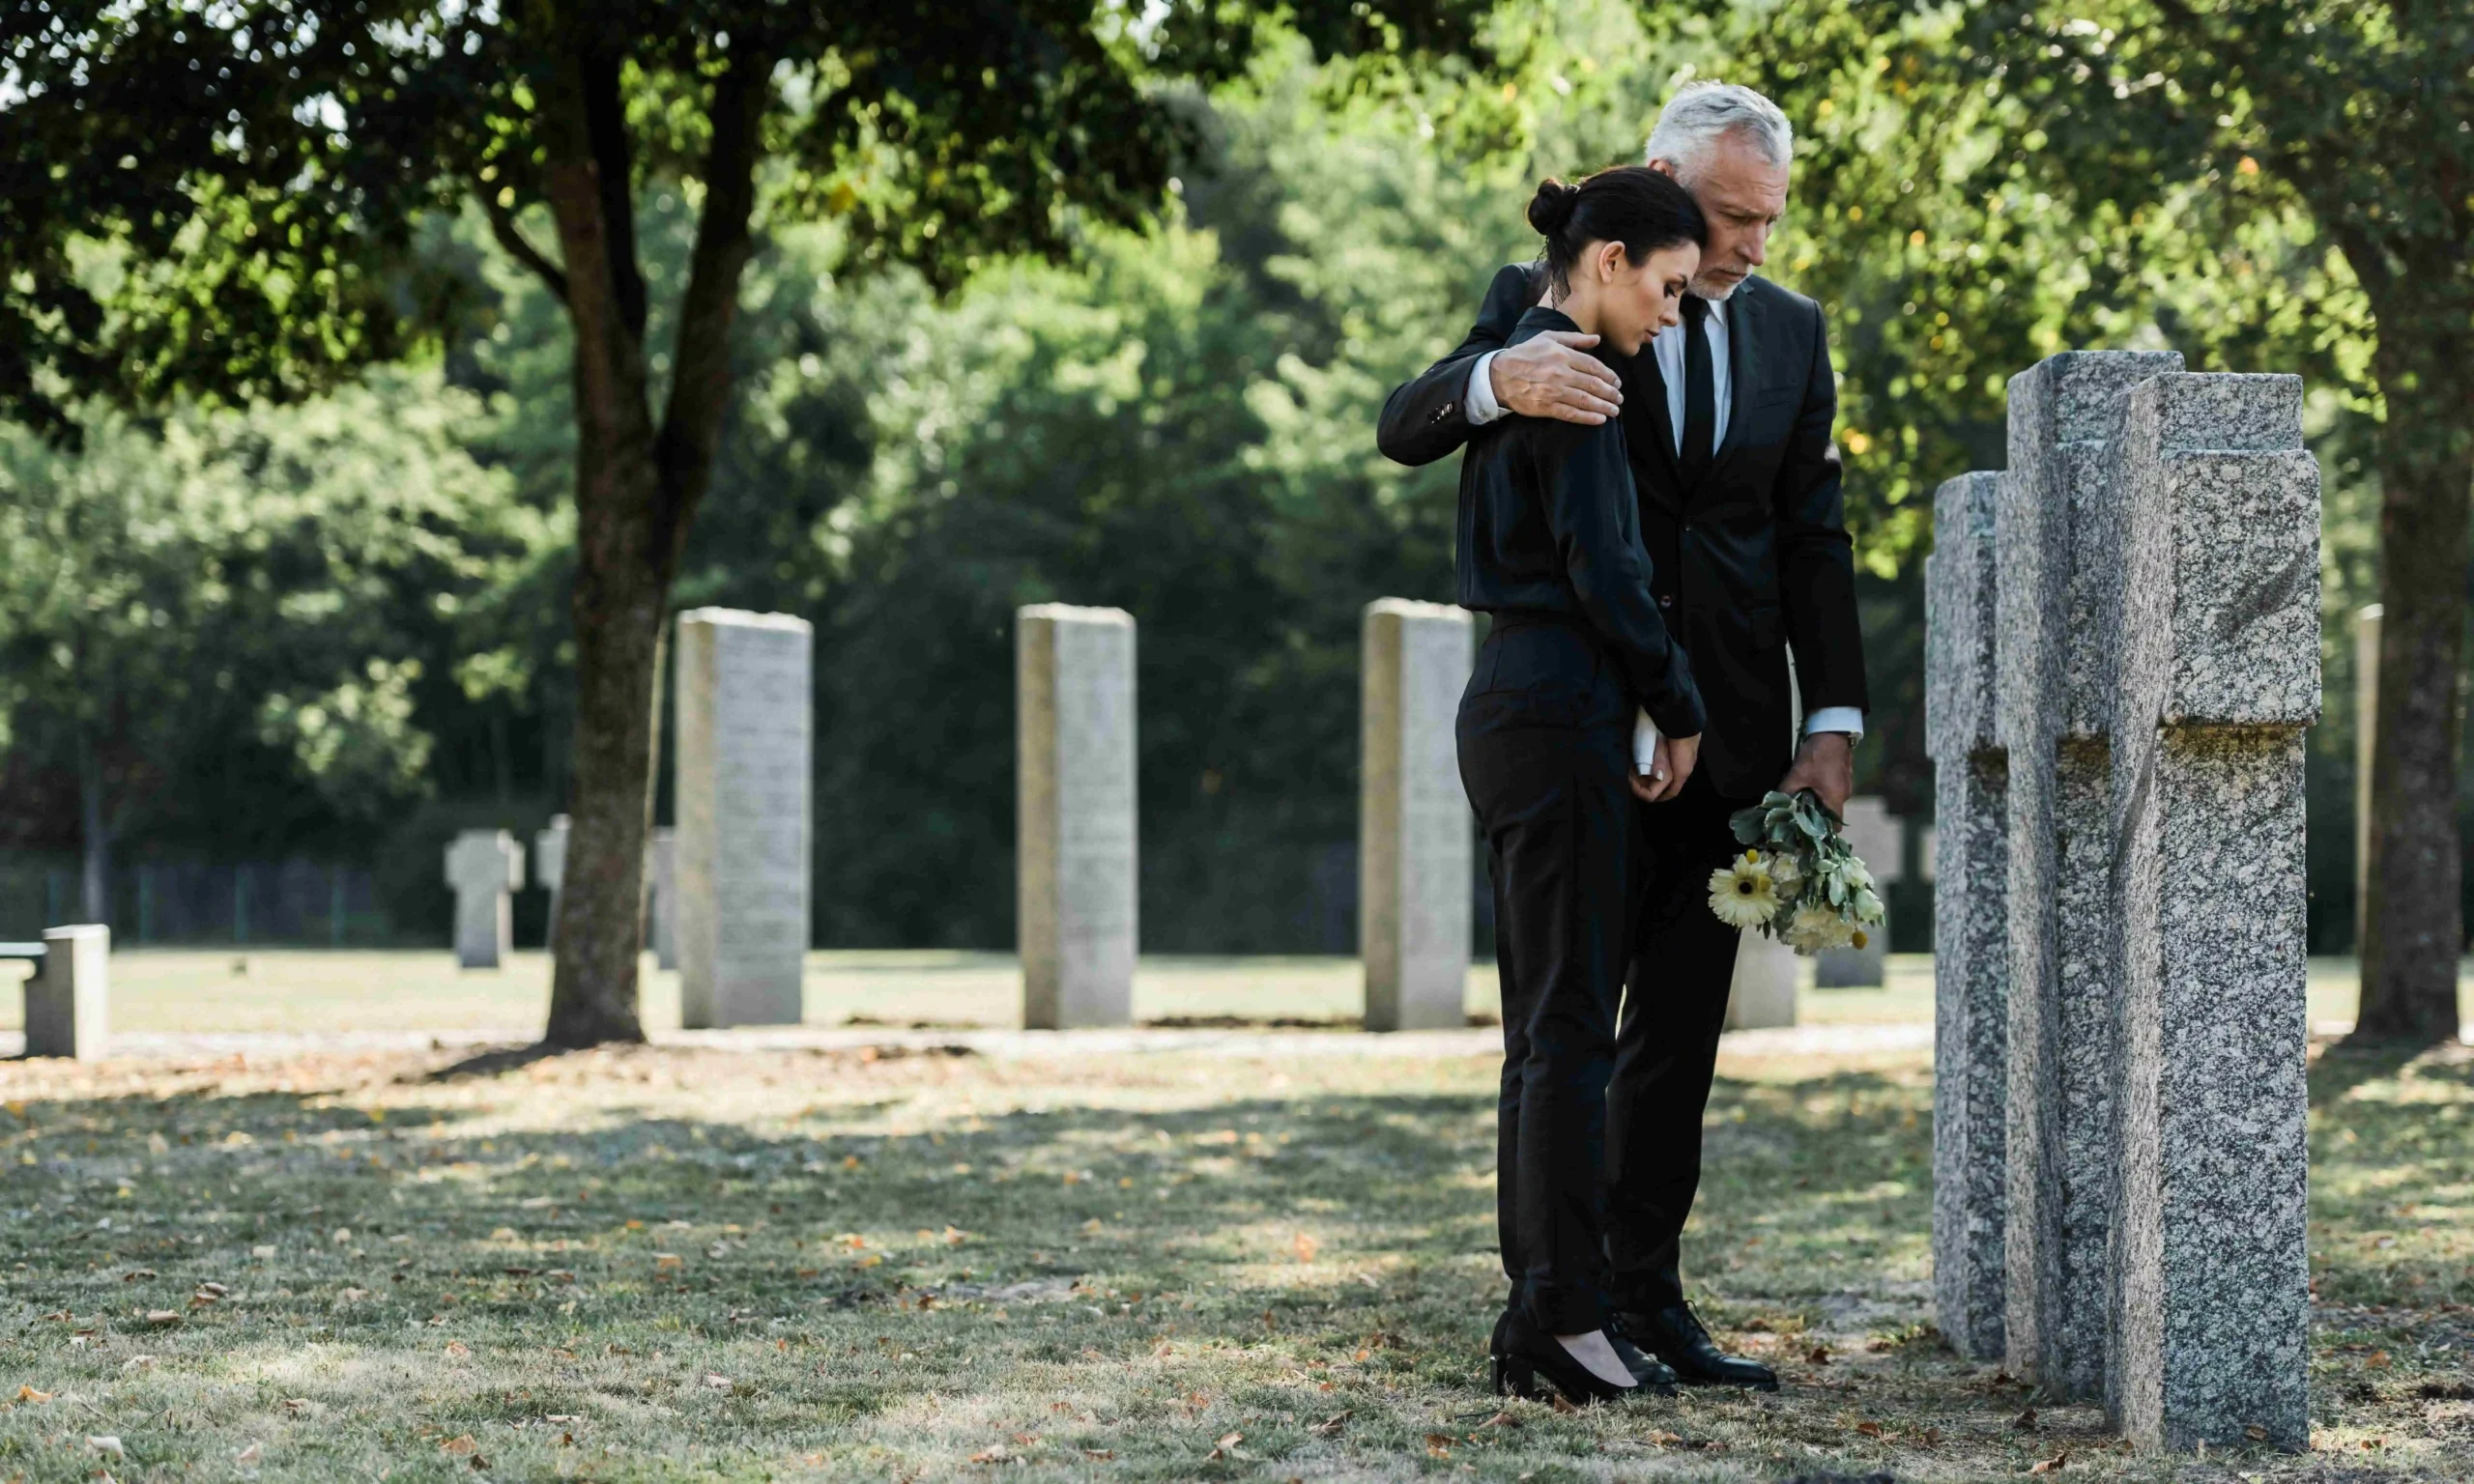 A man with his hands on a crying woman's shoulder as they mourn the loss of a loved one at a grave.